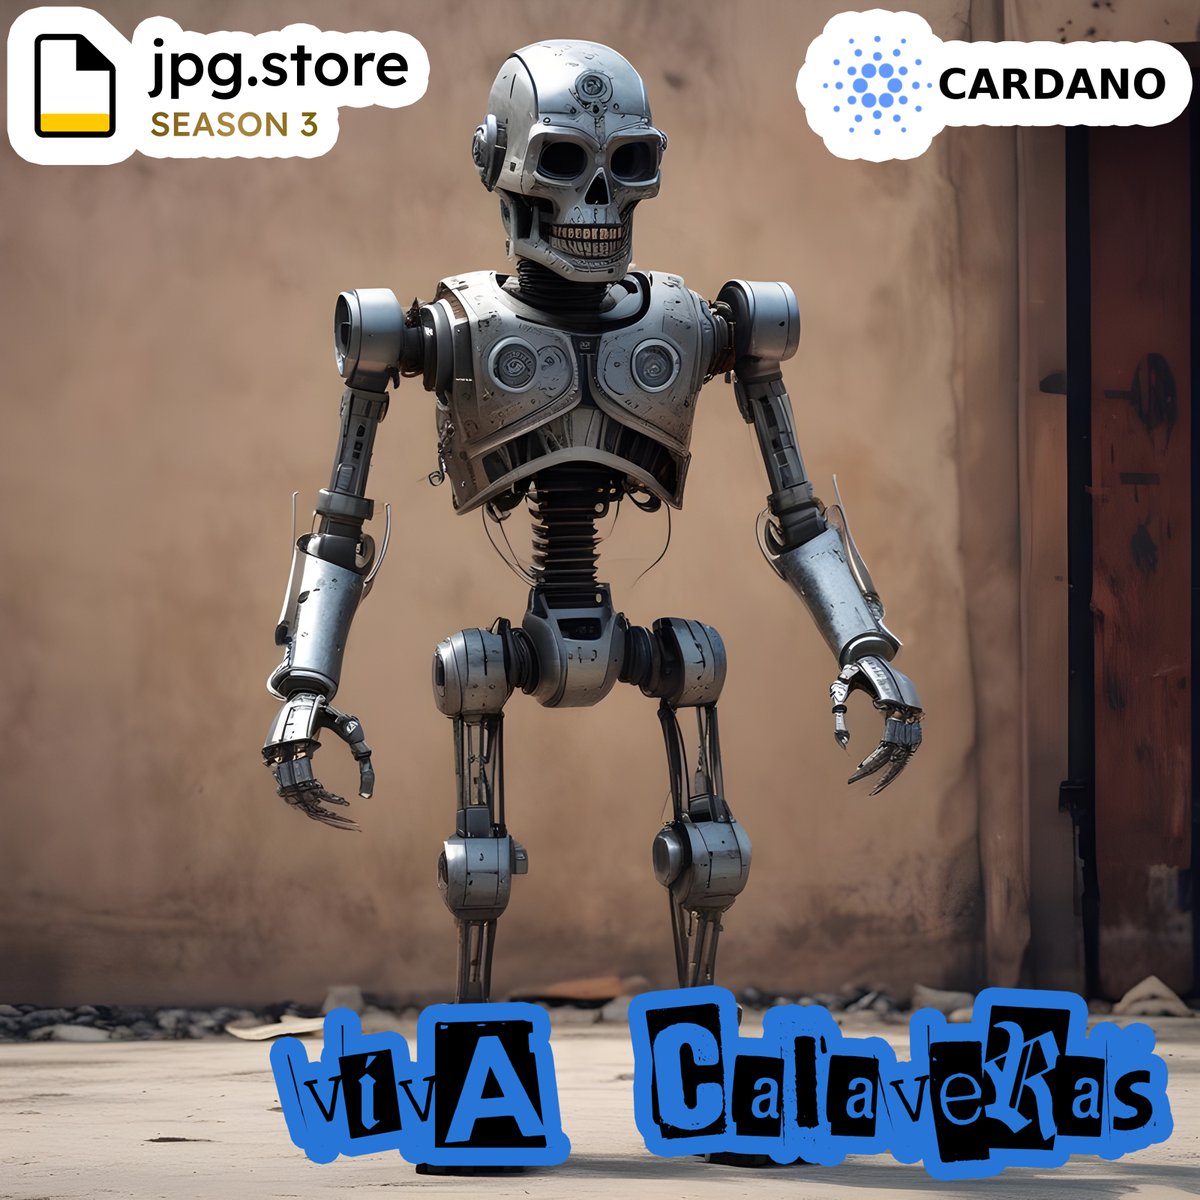 Viva Calaveras on Cardano via jpg.store ! These NFTs can be redeemed for a signed 3D printed K-SCOPES® Trading Card.

Plex
jpg.store/listing/226769…

#cardano #ADA #CardanoNFT #NFT #vivacalaveras #calaveras #kscopes #tradingcards #3dprinting #AI #AImusic